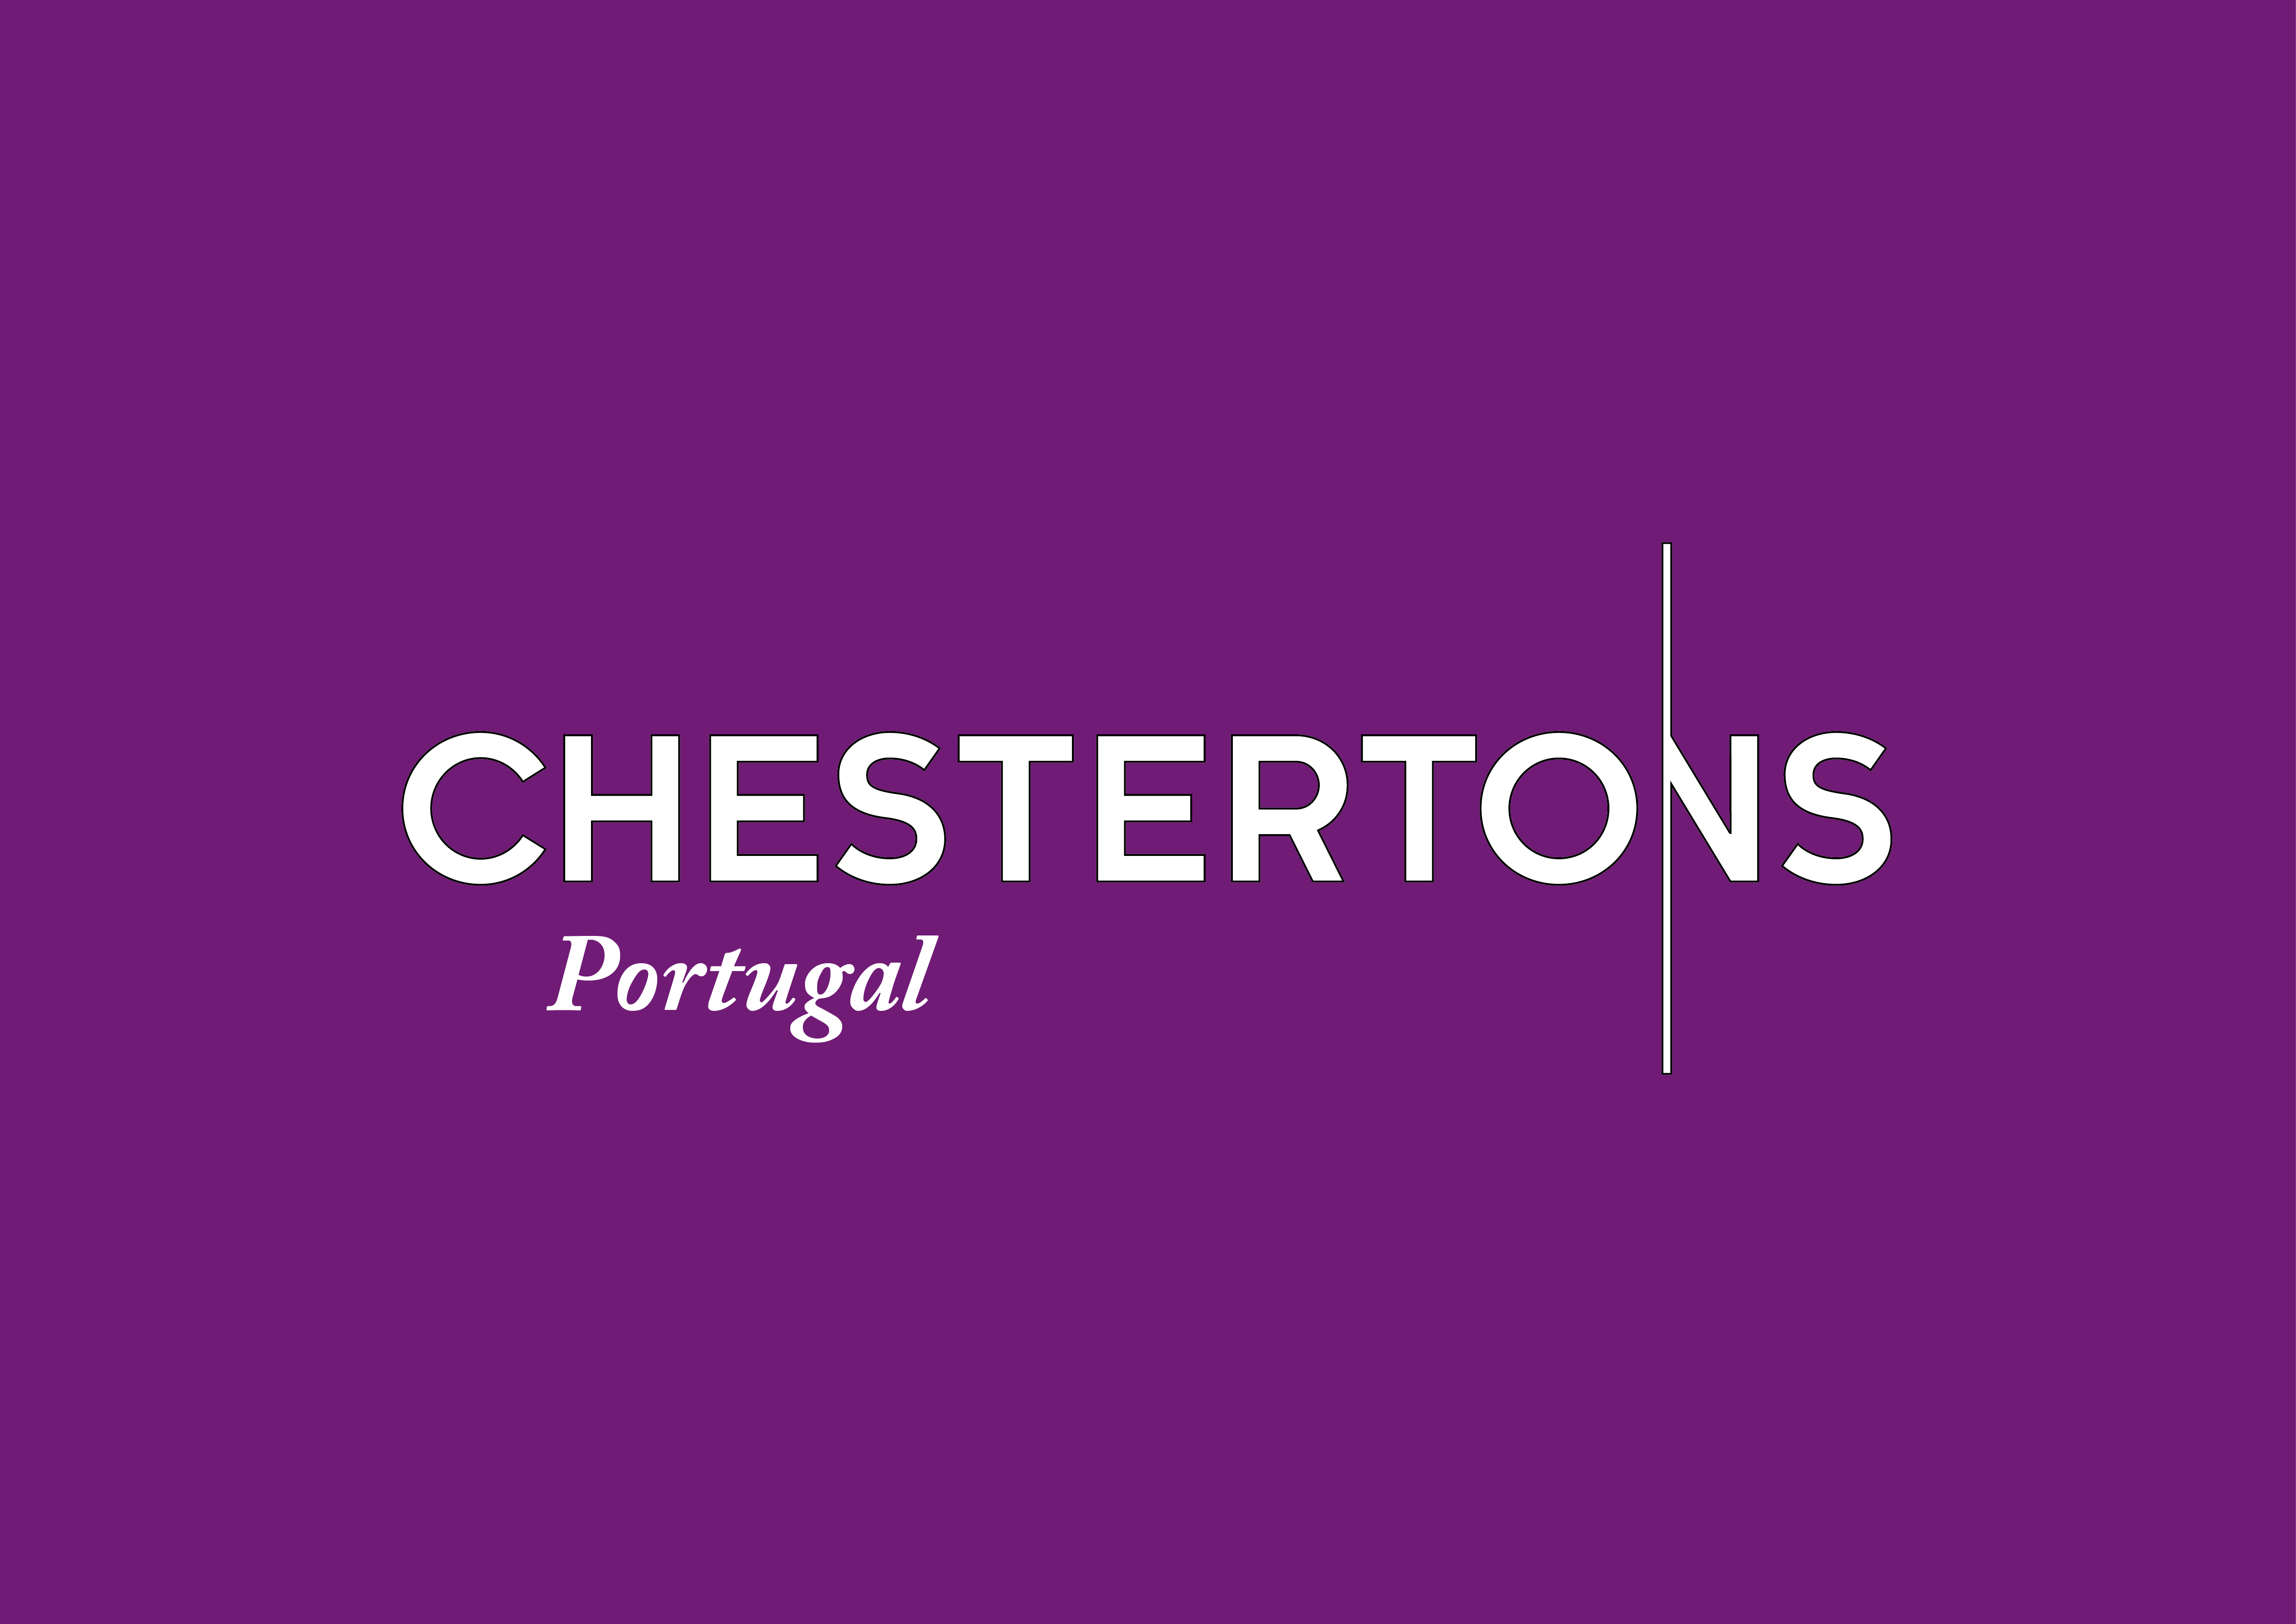 Chestertons Portugal